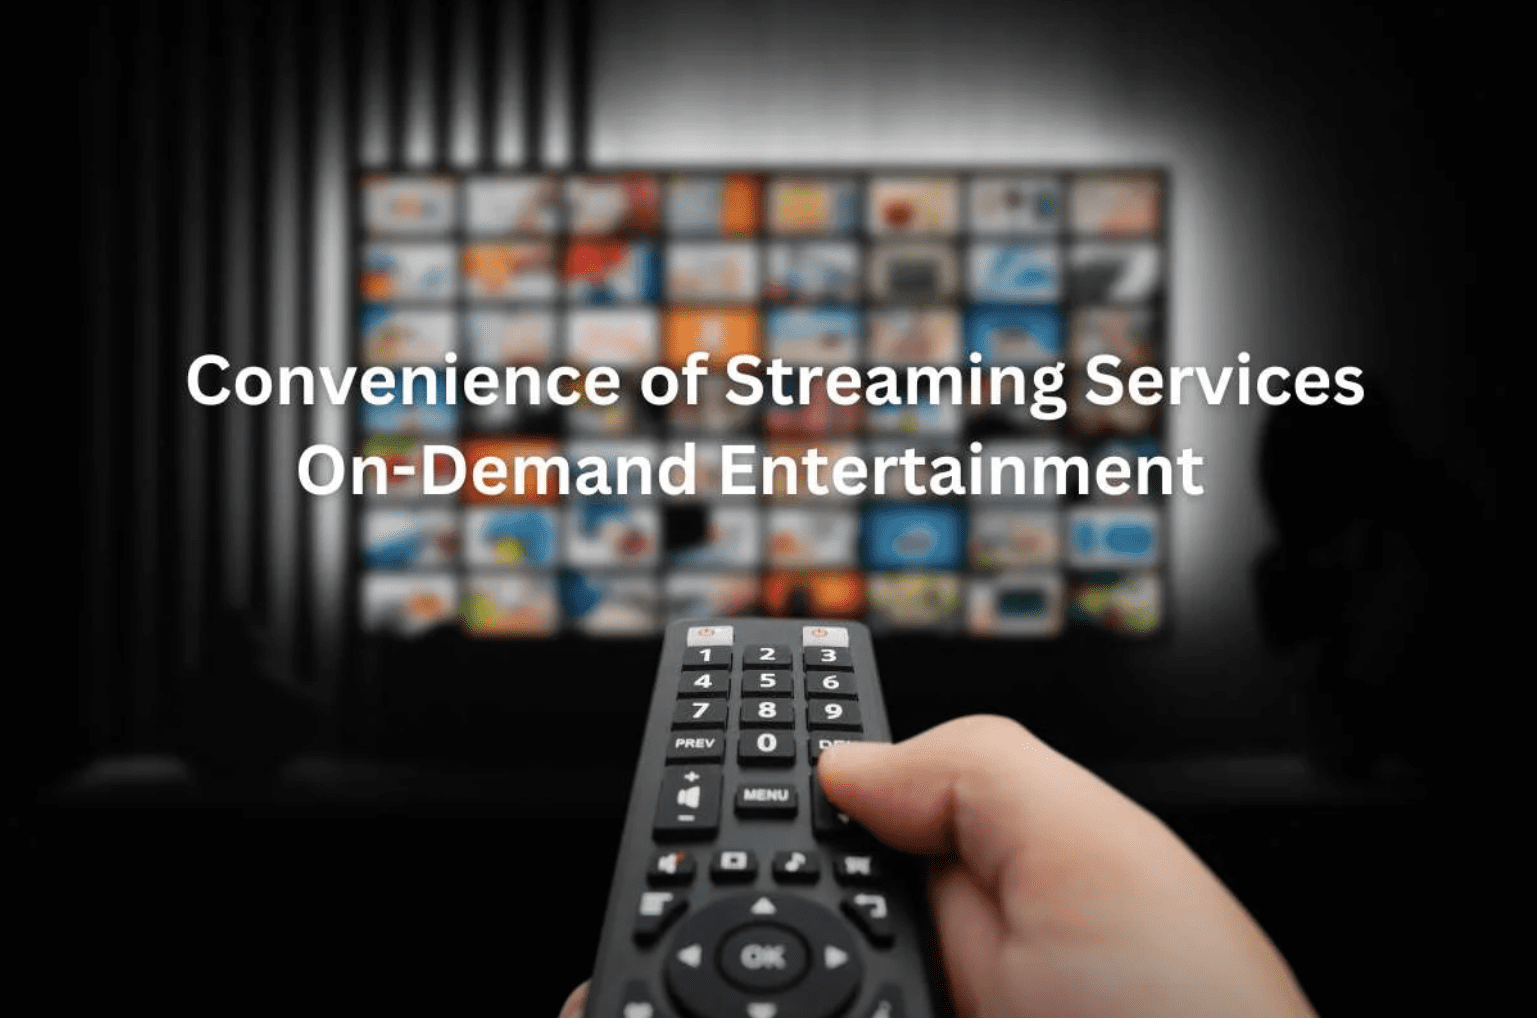 Convenience of Streaming Services for On-Demand Entertainment